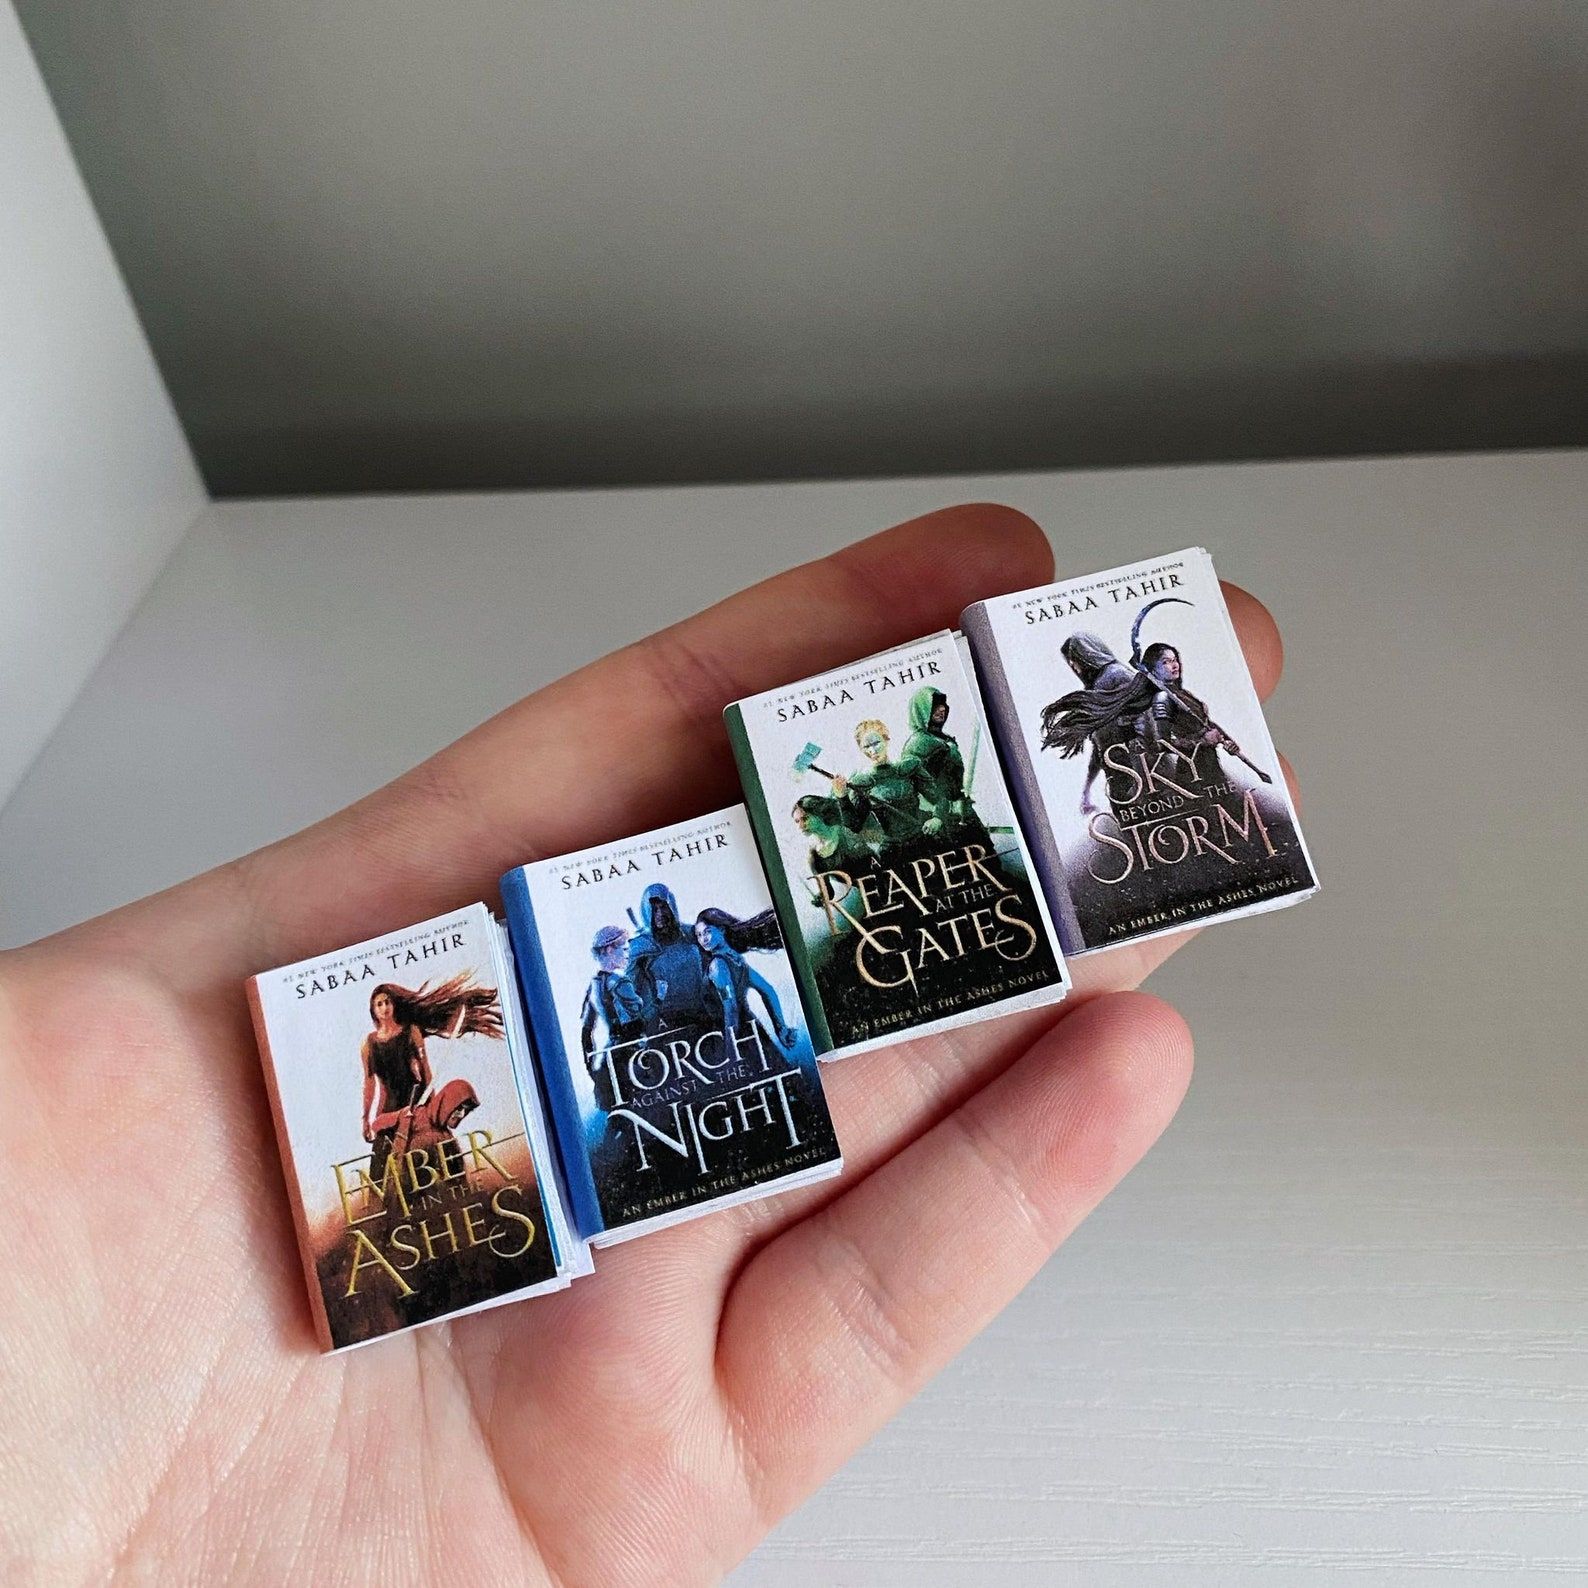 Four mini books with the covers of the Ember in the Ashes series